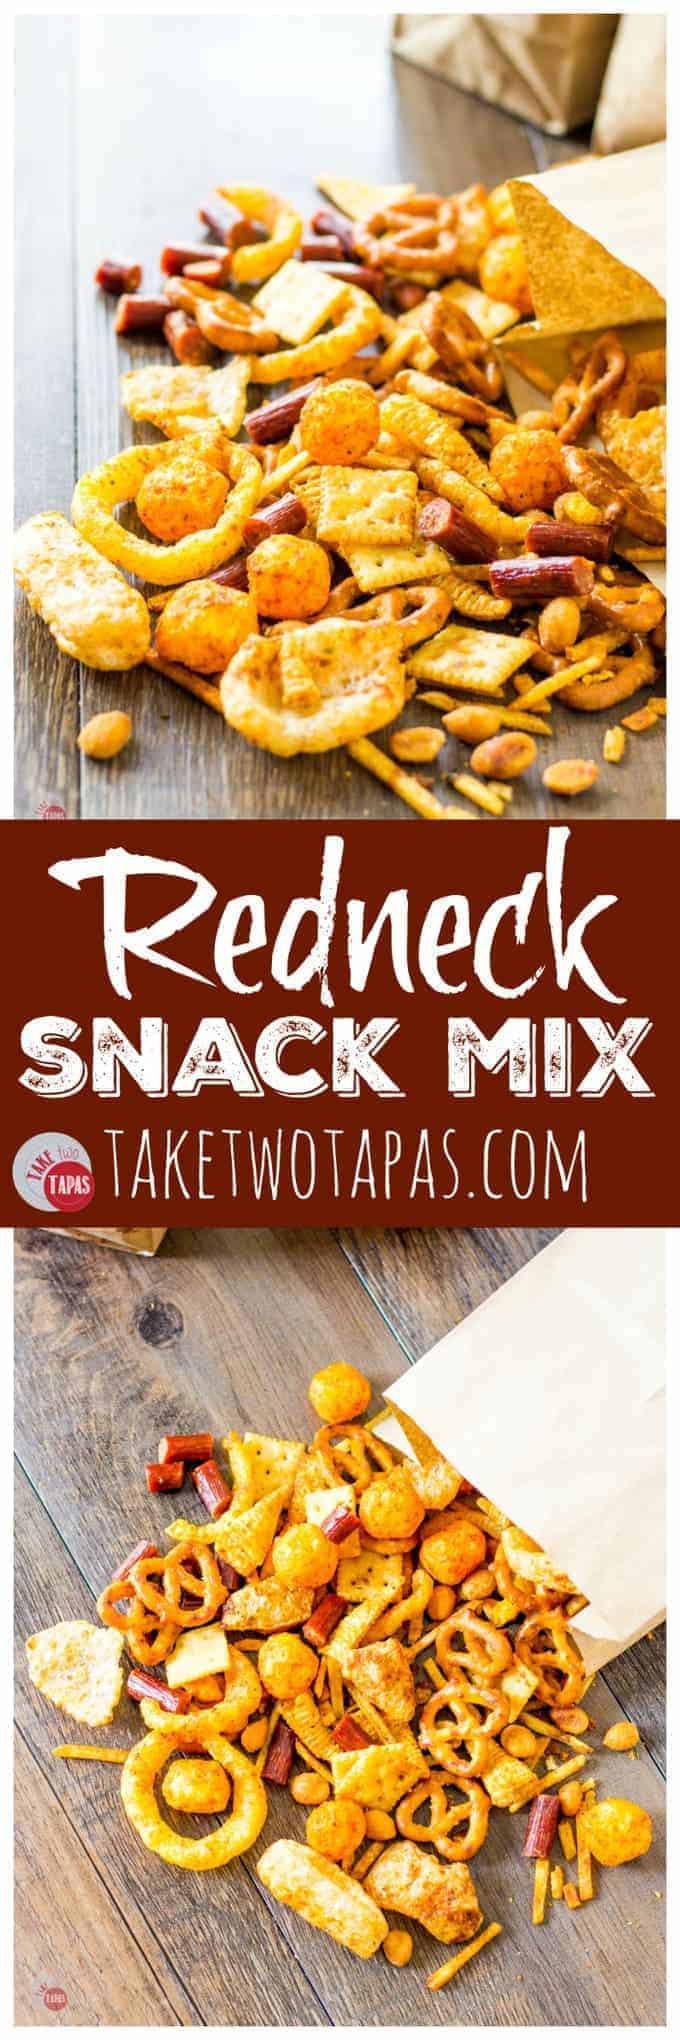 Redneck Snack Mix Party Mix For Tailgating or Any Occasion!